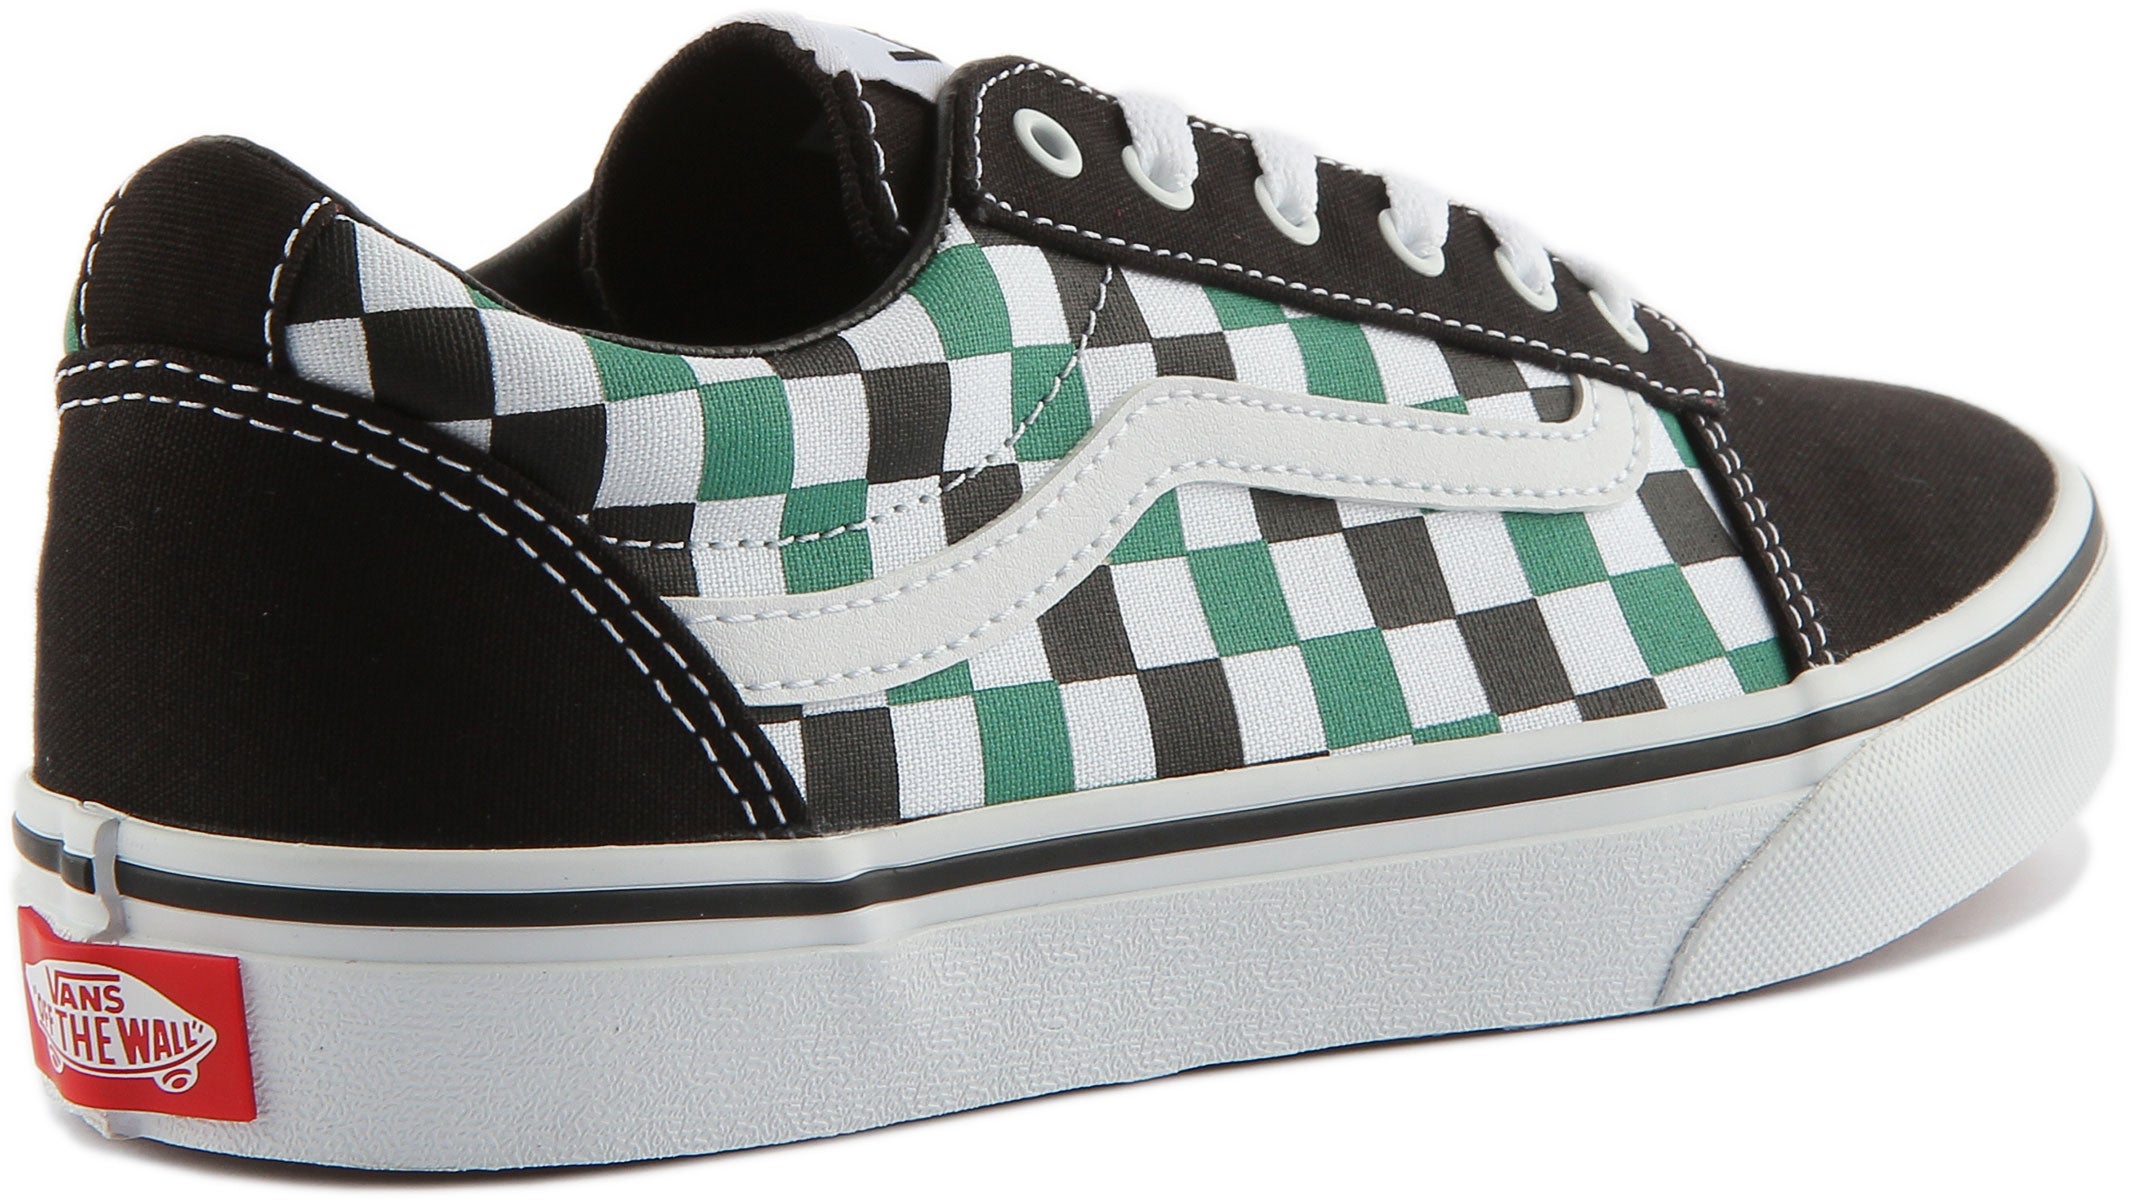 Vans Old Skool Green Suede Checkerboard Size 11.5 50th Anniversary Skate  Shoes